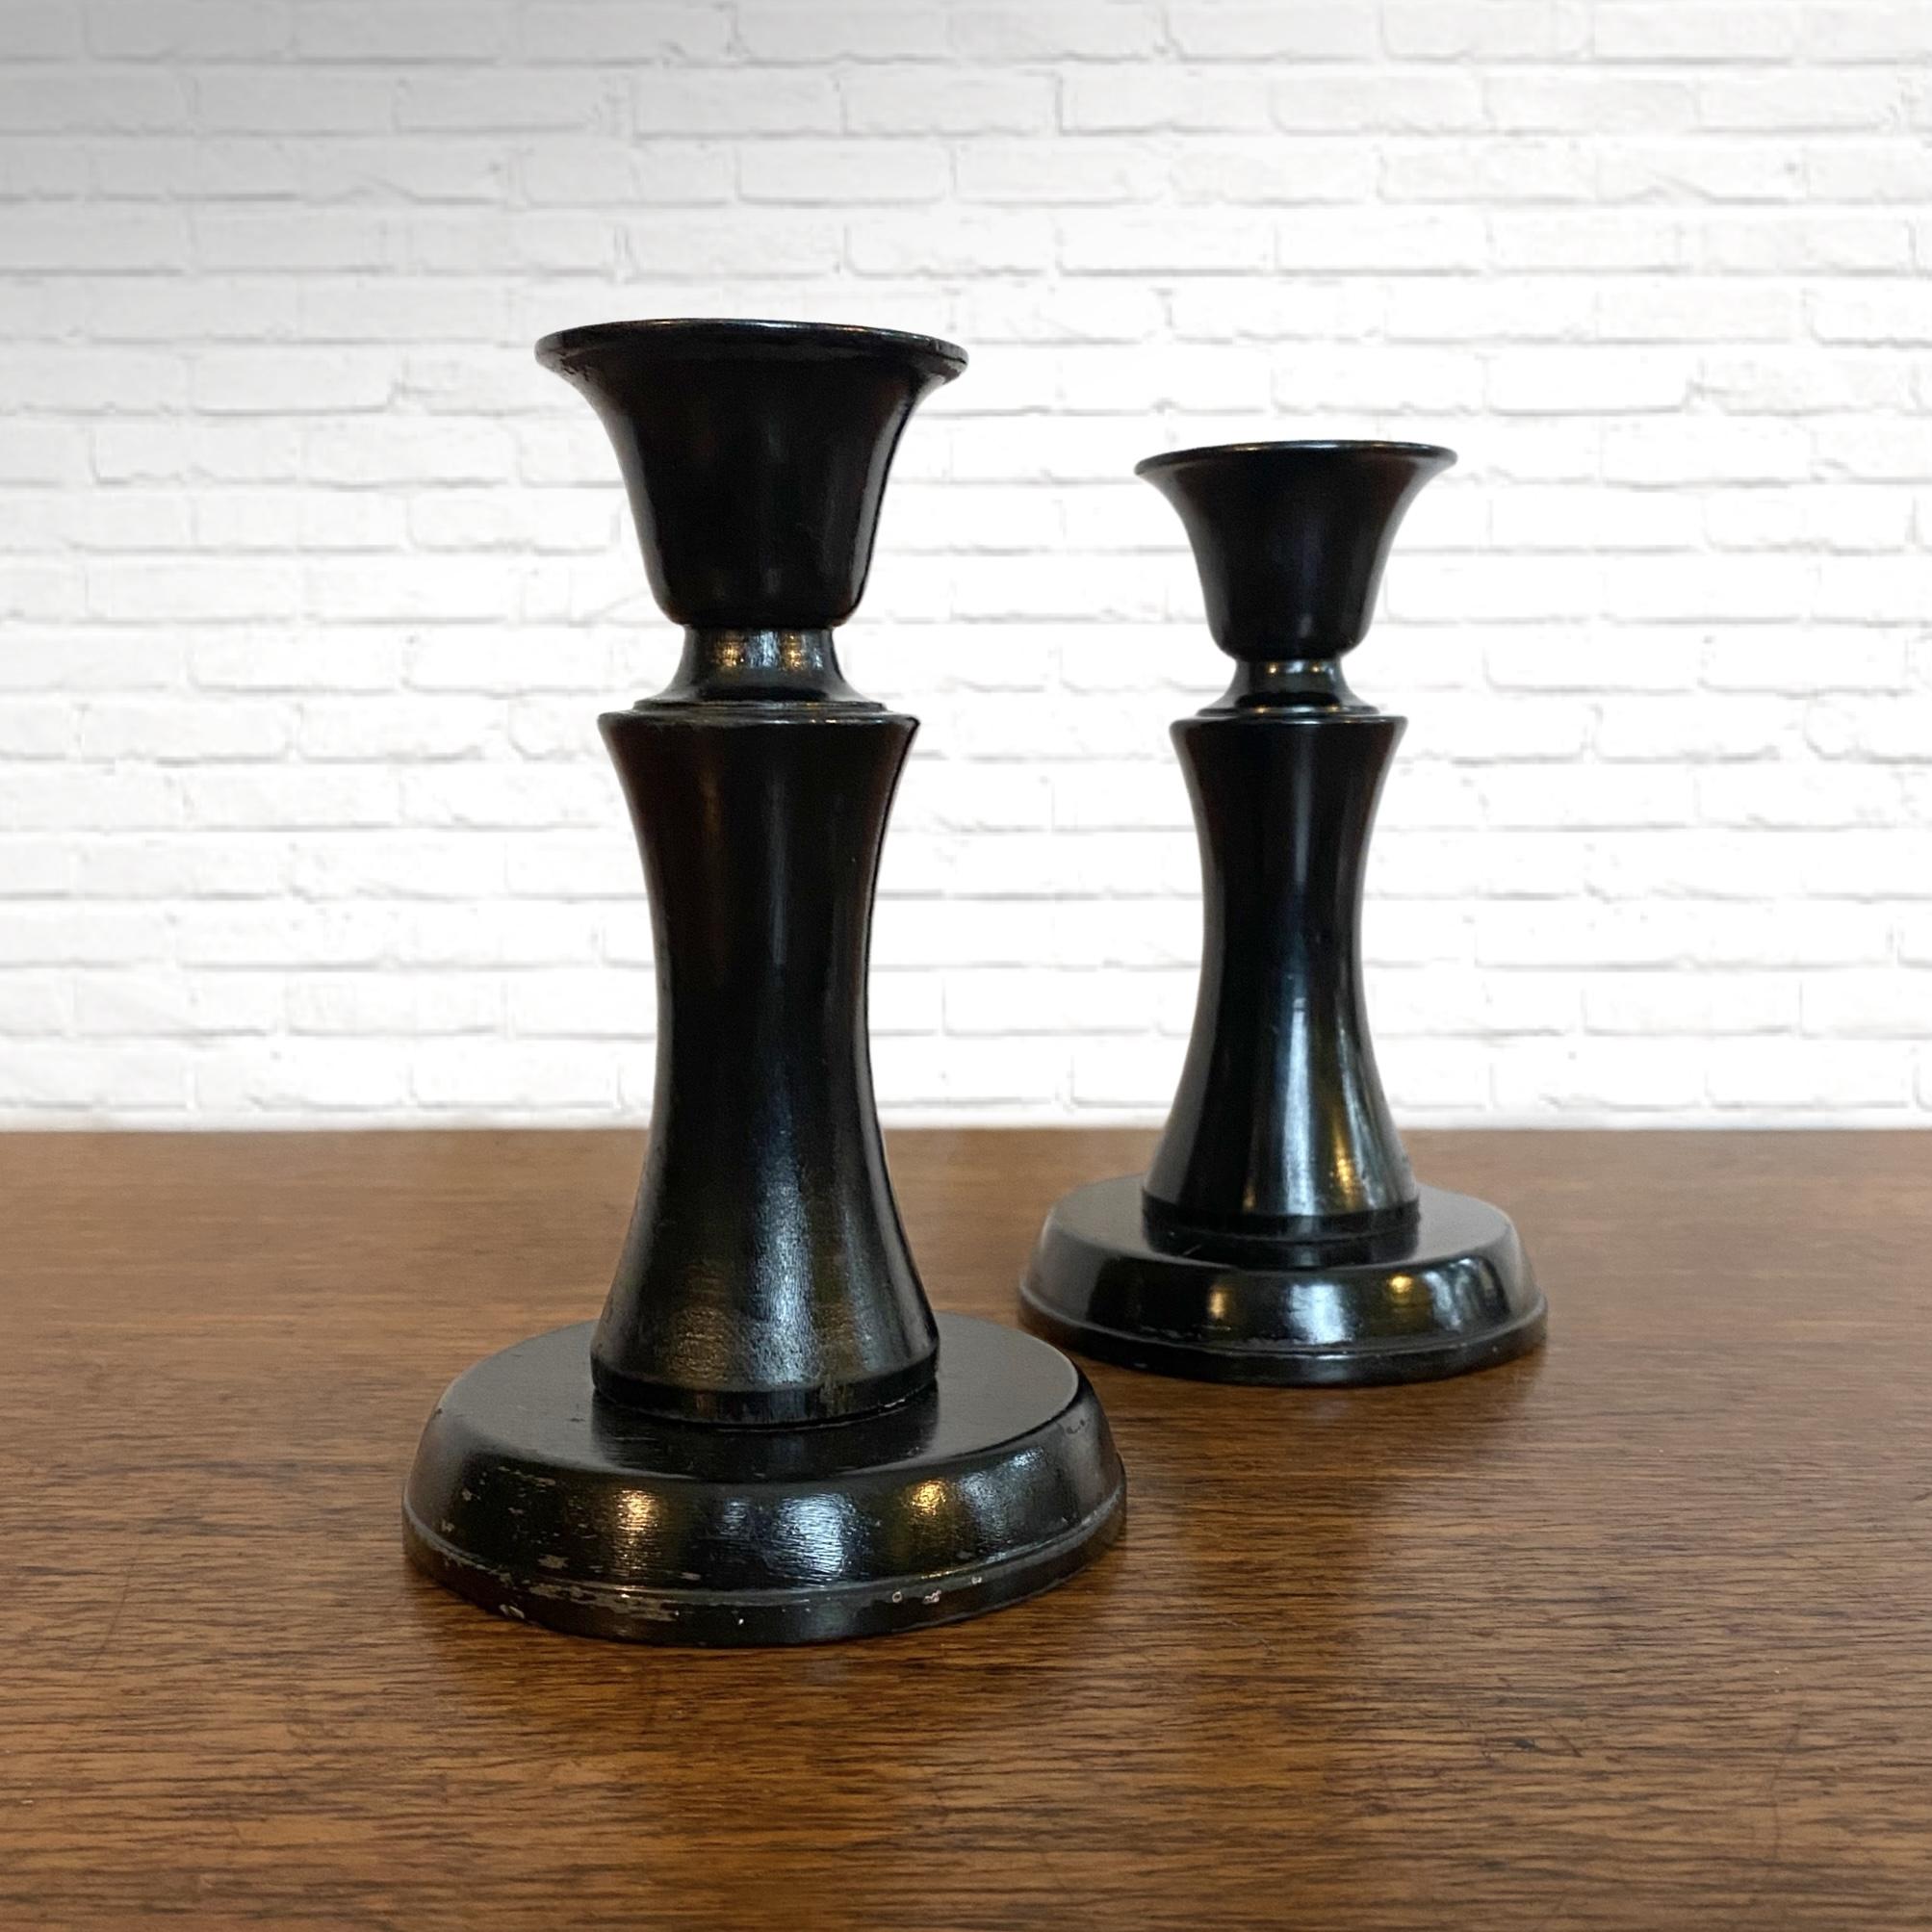 A matching pair of candlesticks number 11, designed by Carl Malmsten in 1927 for Liljeholmens Stearinfabrik. Black painted birch. Malmsten designed a series of candlesticks for the stearine candle manufacturer during a challenging economic period